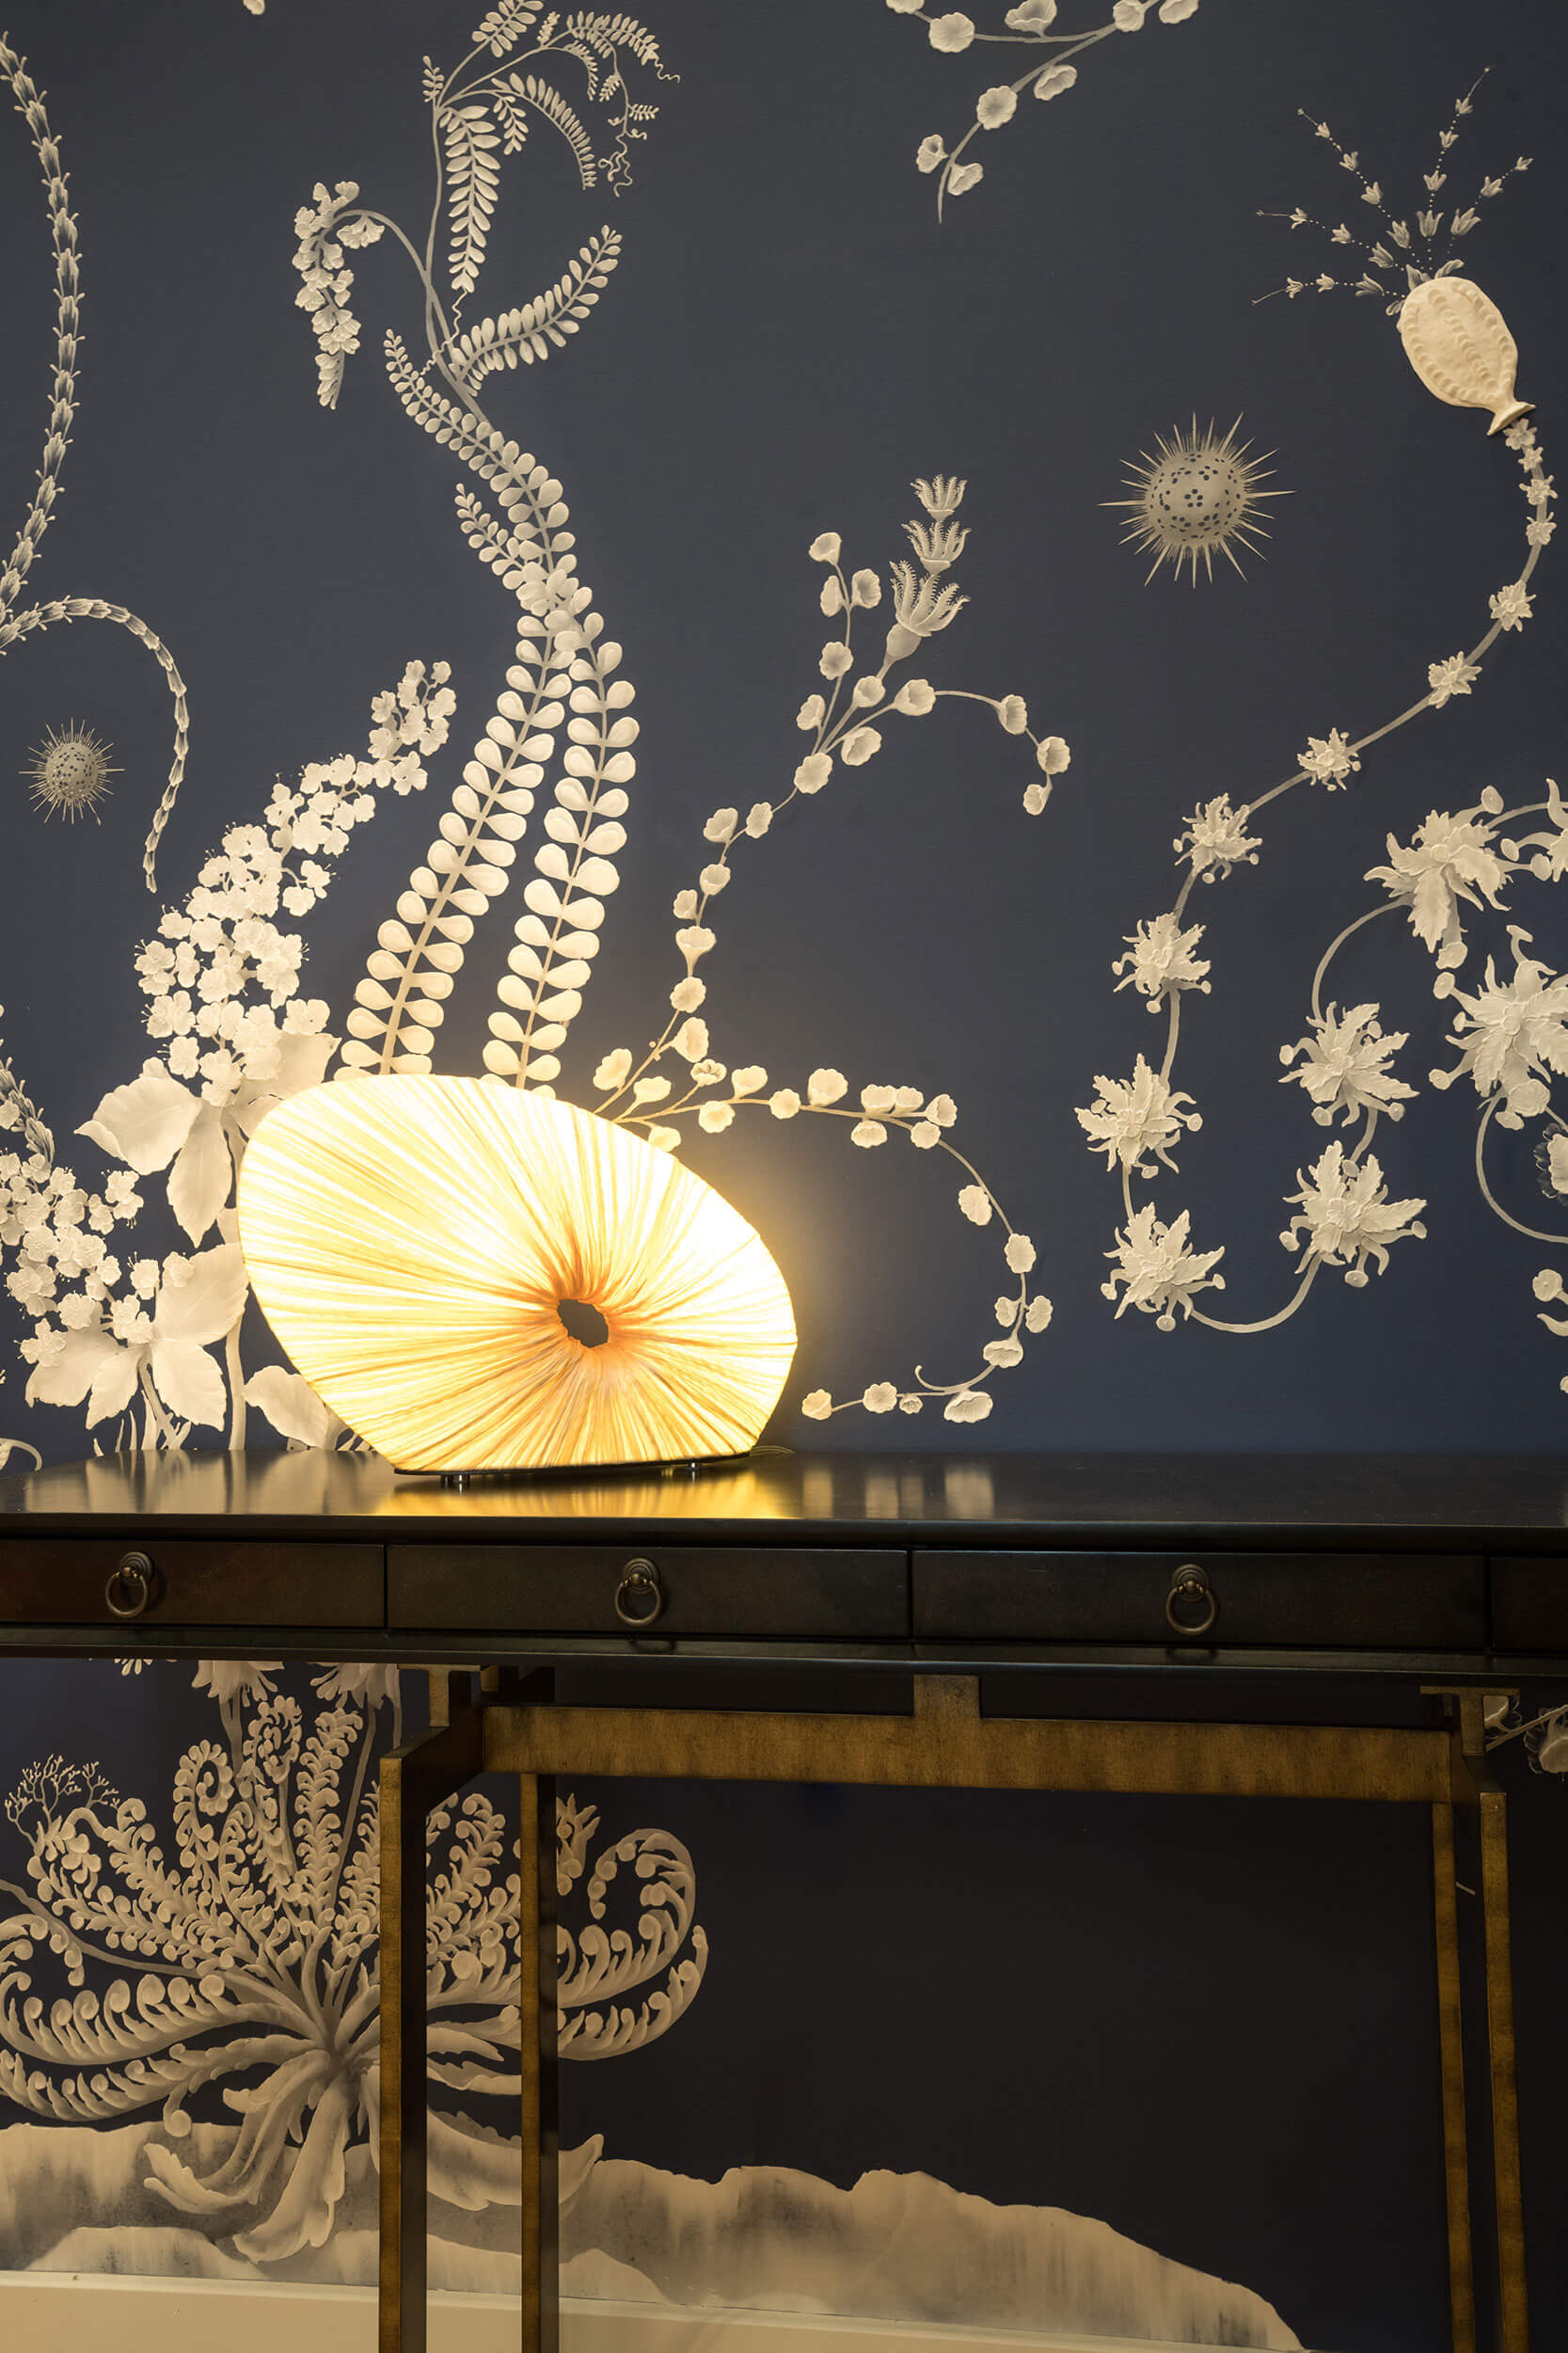 Doe Table Lamp in Cream silk on a dark wooden table against a dark blue wallpaper decorated with golden flower motifs